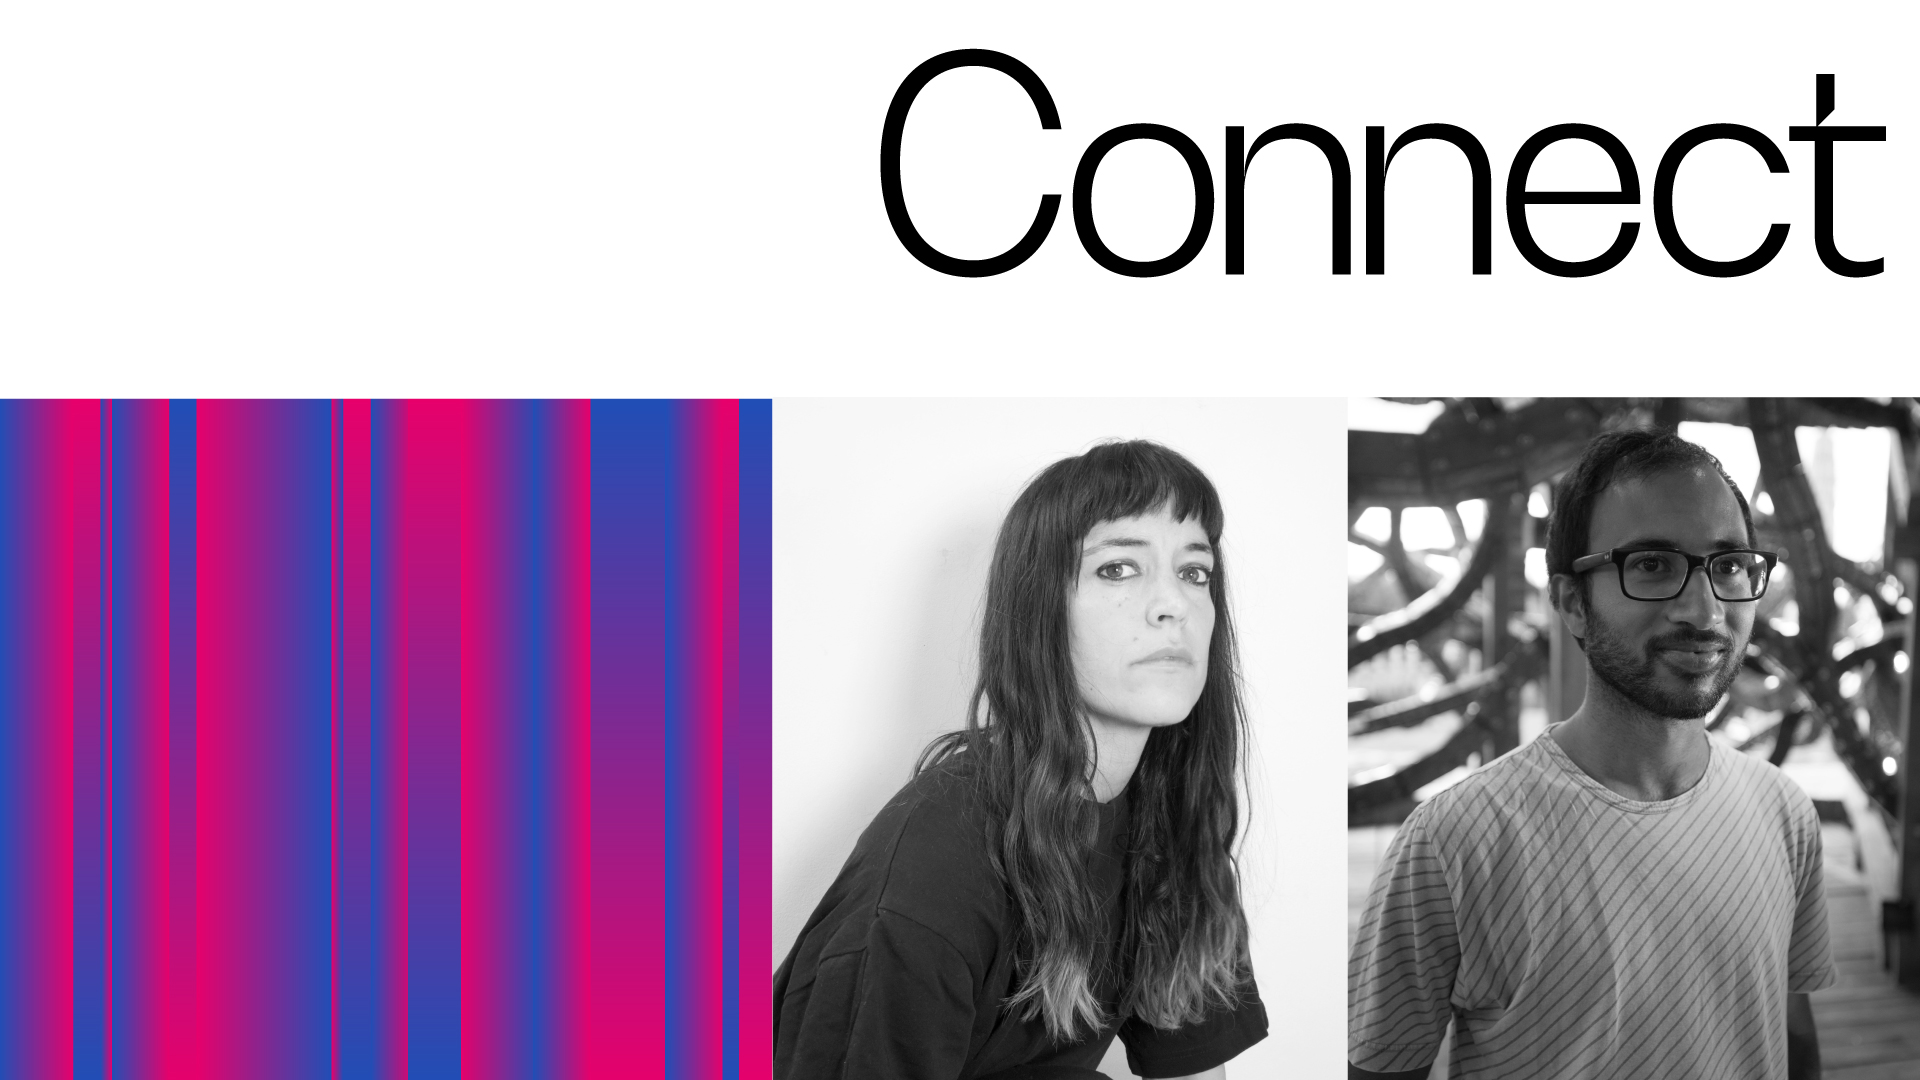 Vimala Pons and Robin Meier Wiratunga are the artists selected for the sixth edition of Connect (image: CERN)